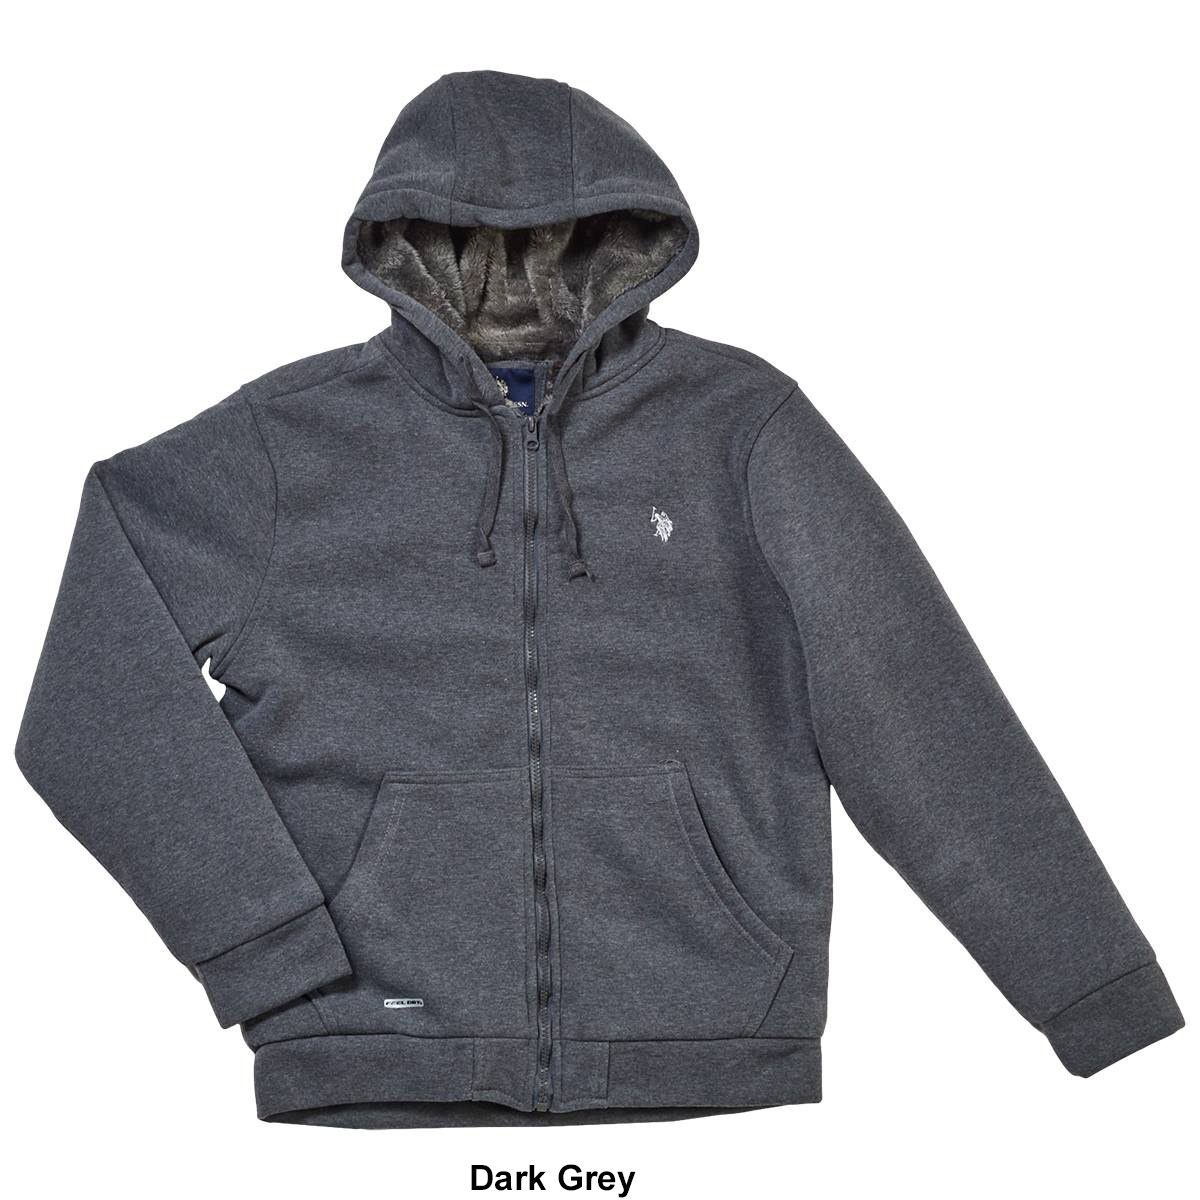 Mens U.S. Polo Assn.(R) Solid Sherpa Lined Hoodie